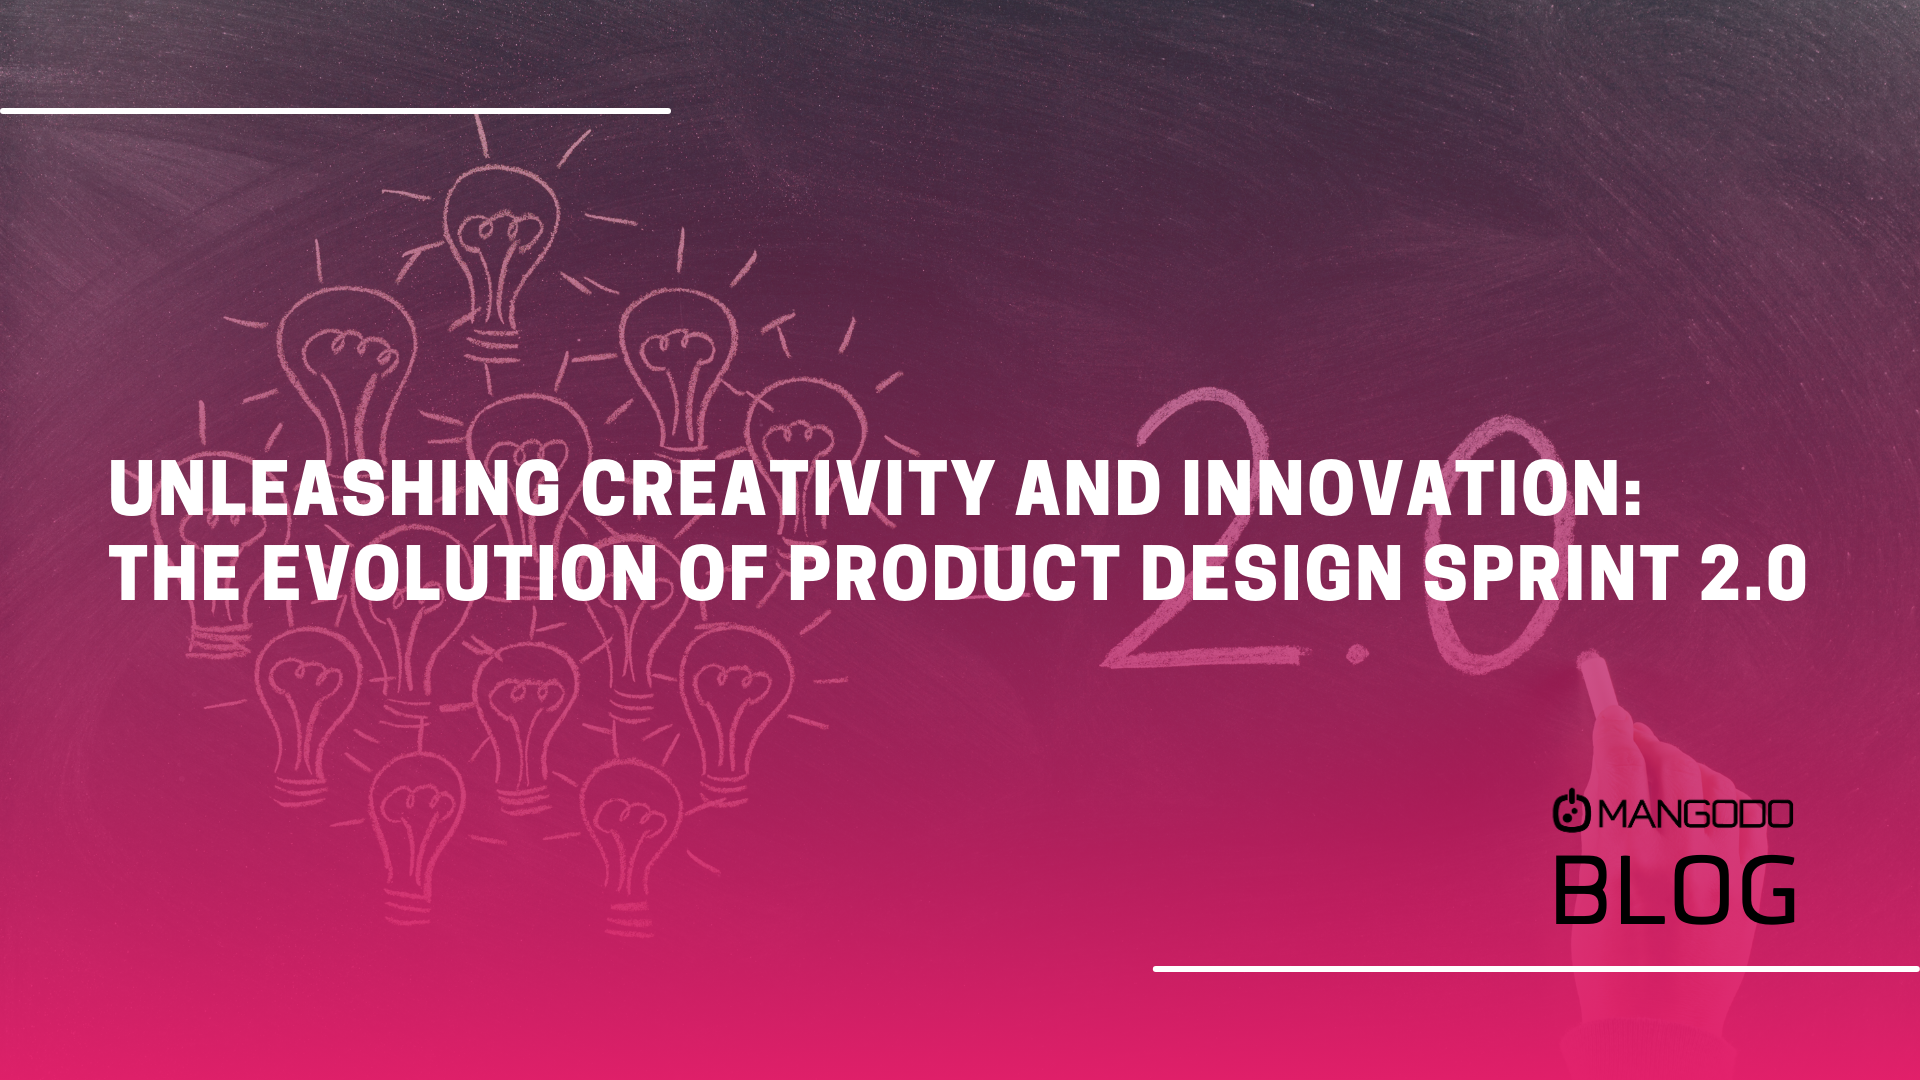 Unleashing Creativity and Innovation: The Evolution of Product Design Sprint 2.0